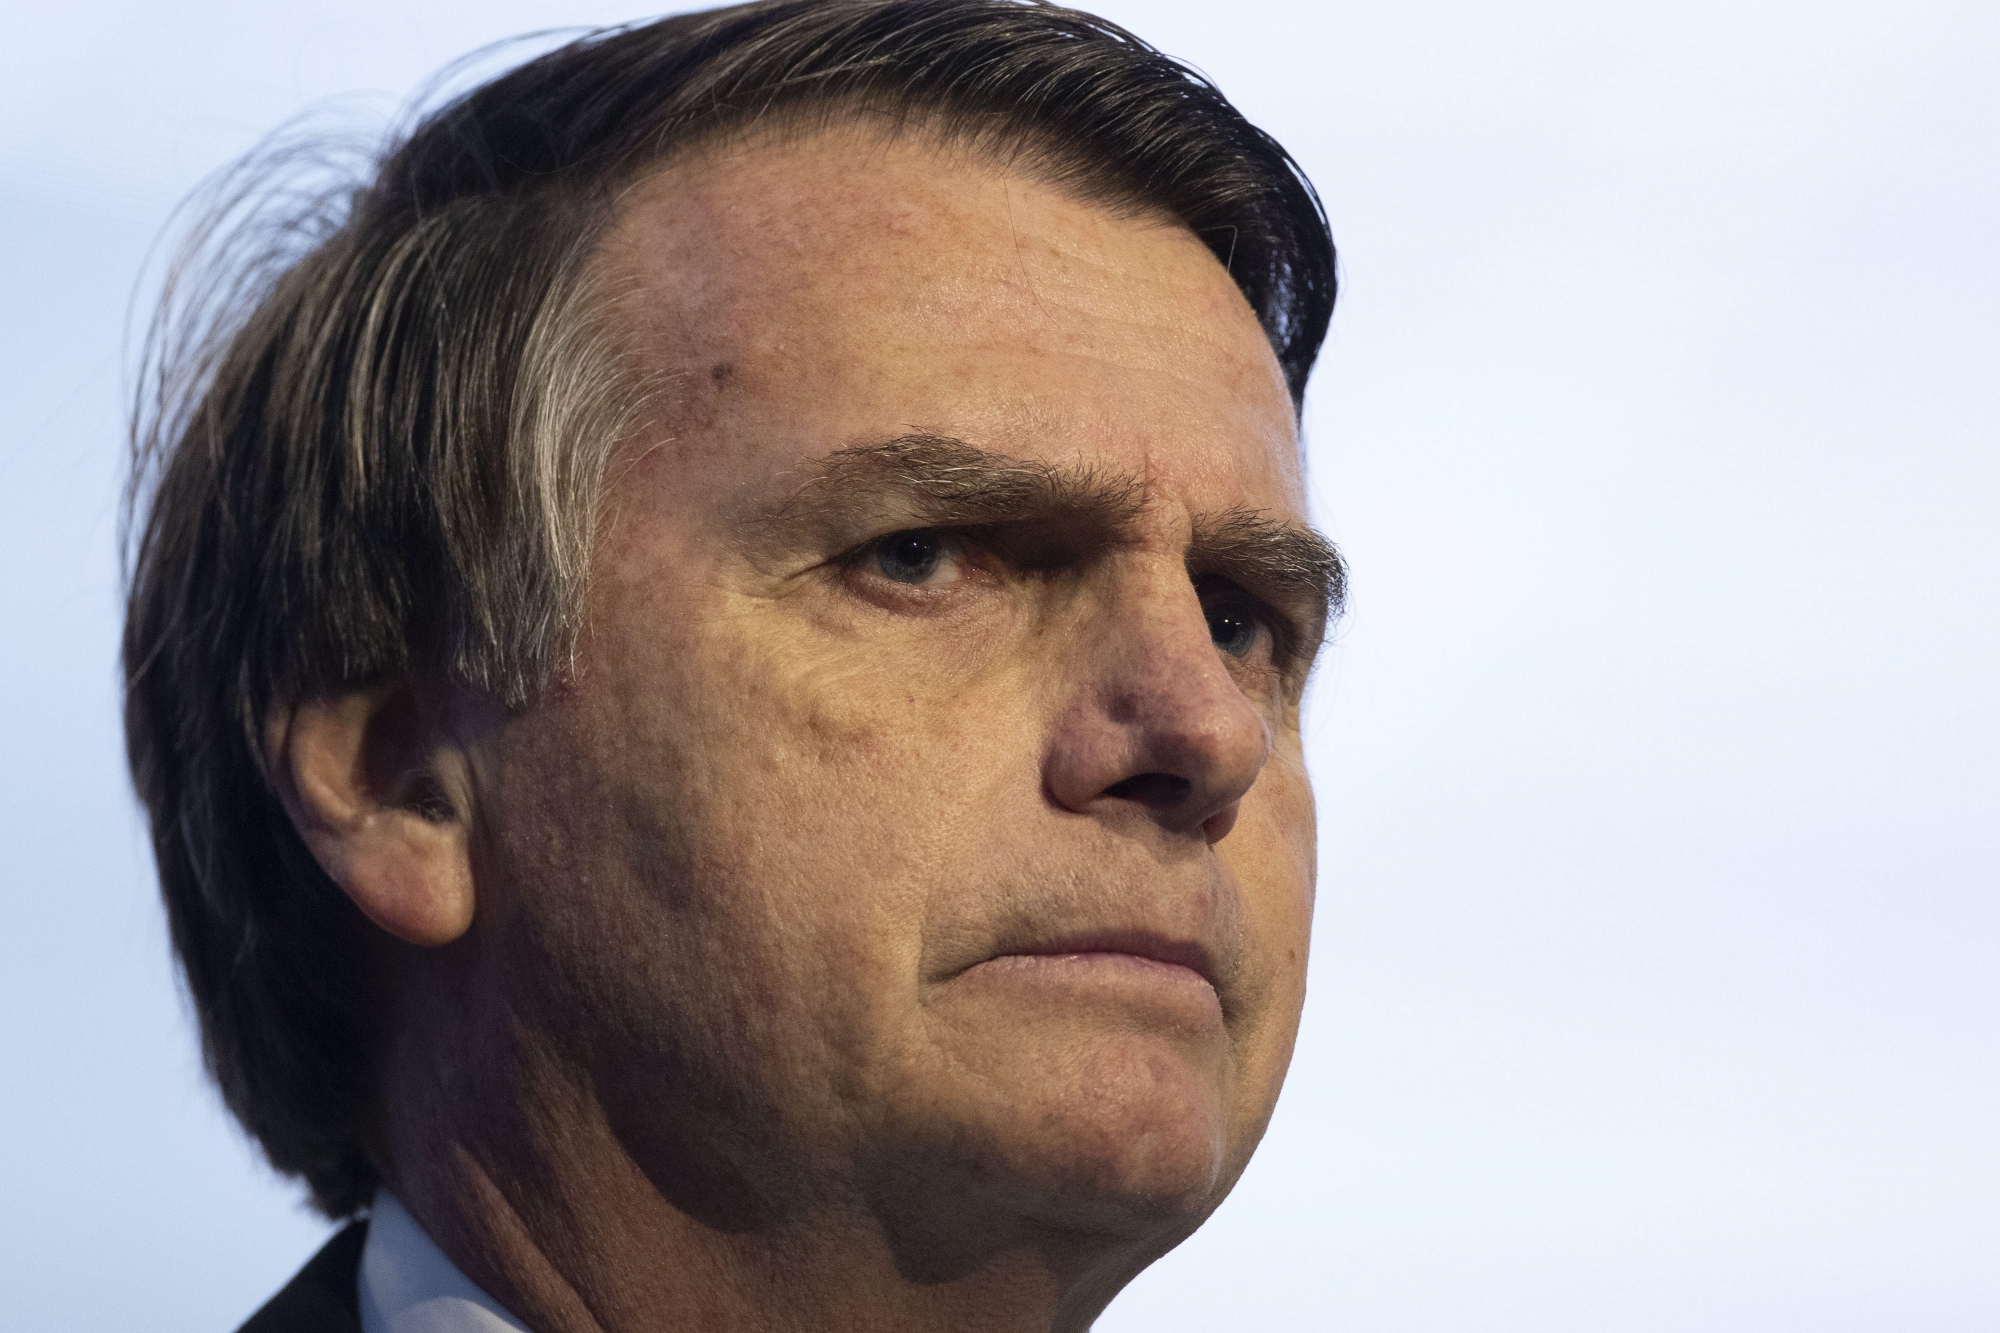 epa06864332 The far-right Jair Bolsonaro, who leads by narrow margin the polls for next October's elections in Brazil, participates in a business meeting organized by the National Confederation of Industry (CNI), in Brasilia, Brazil, 04 July 2018. Six of the leading candidates for the Presidency of Brazil appear today before a business forum, ahead of the general elections in October 2018.  EPA/Joédson Alves BRAZIL ELECTIONS